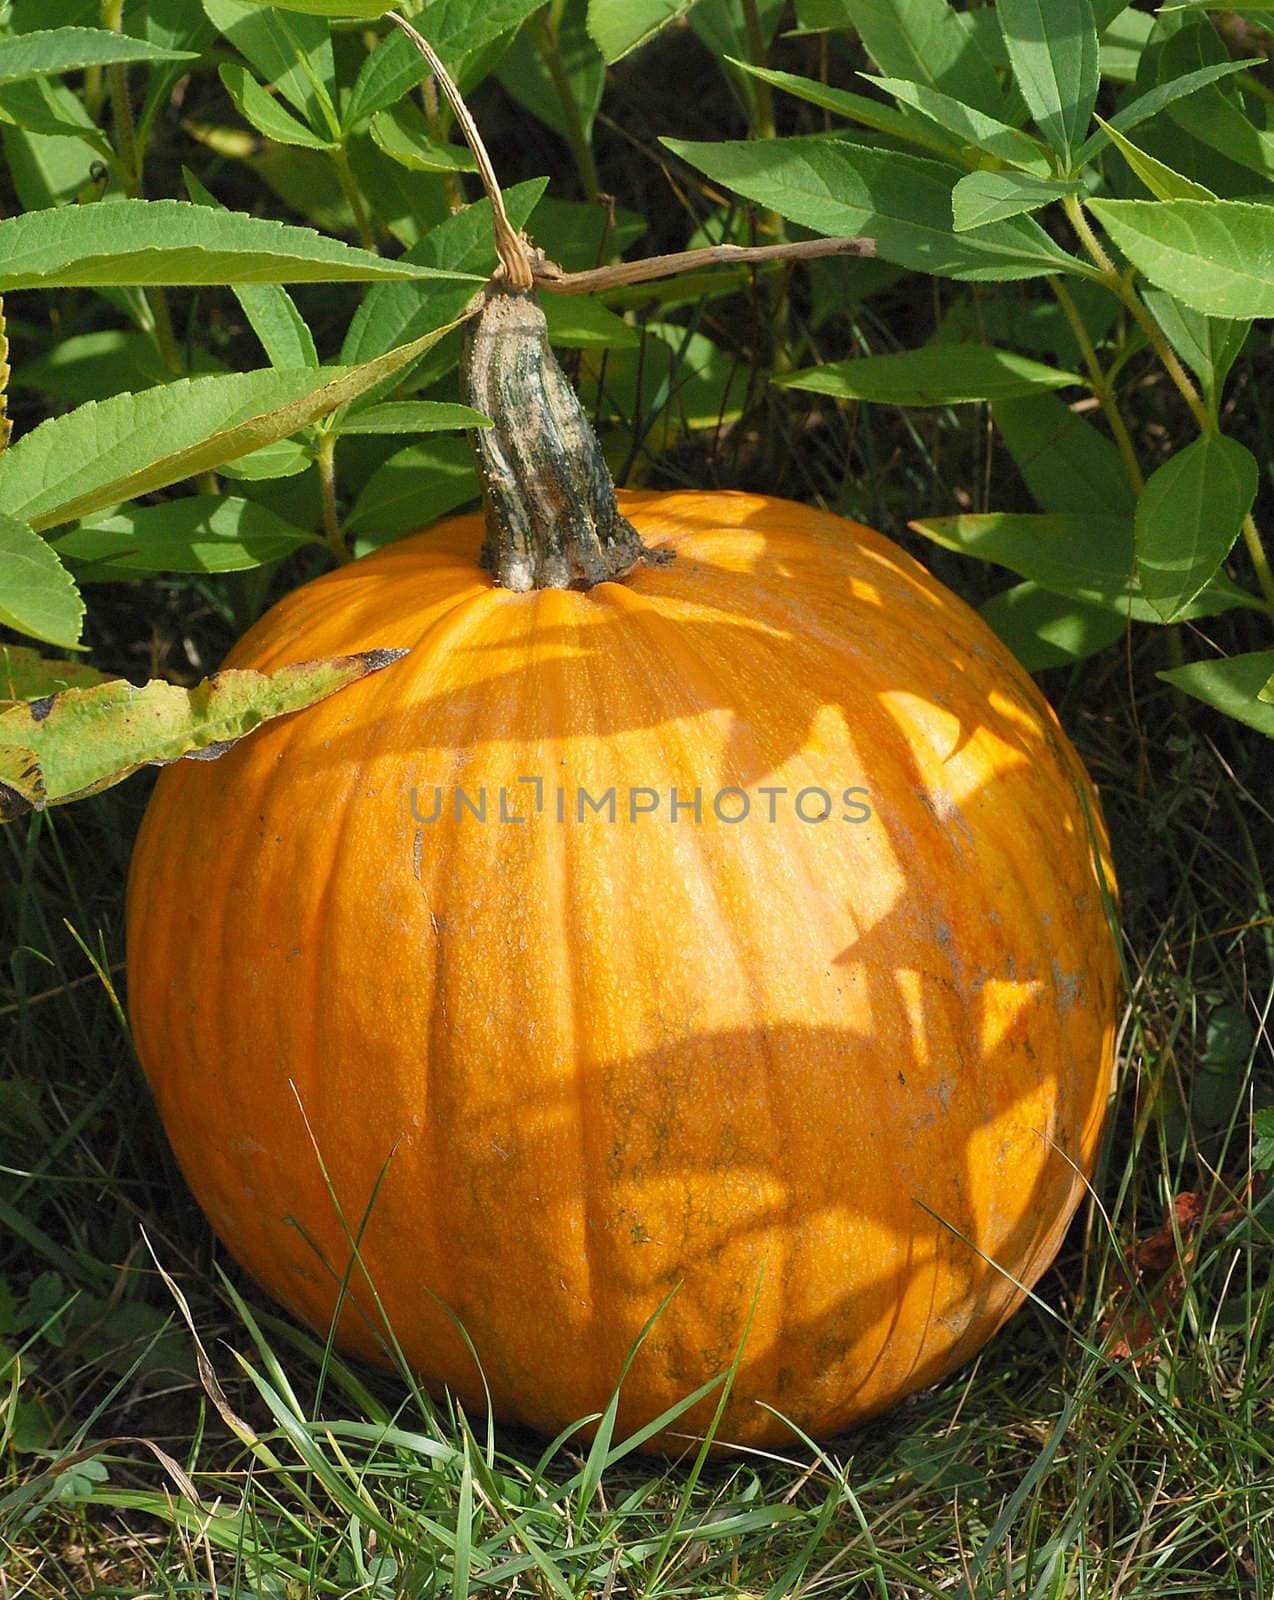 Orange pumpkin in green plant bed and grass